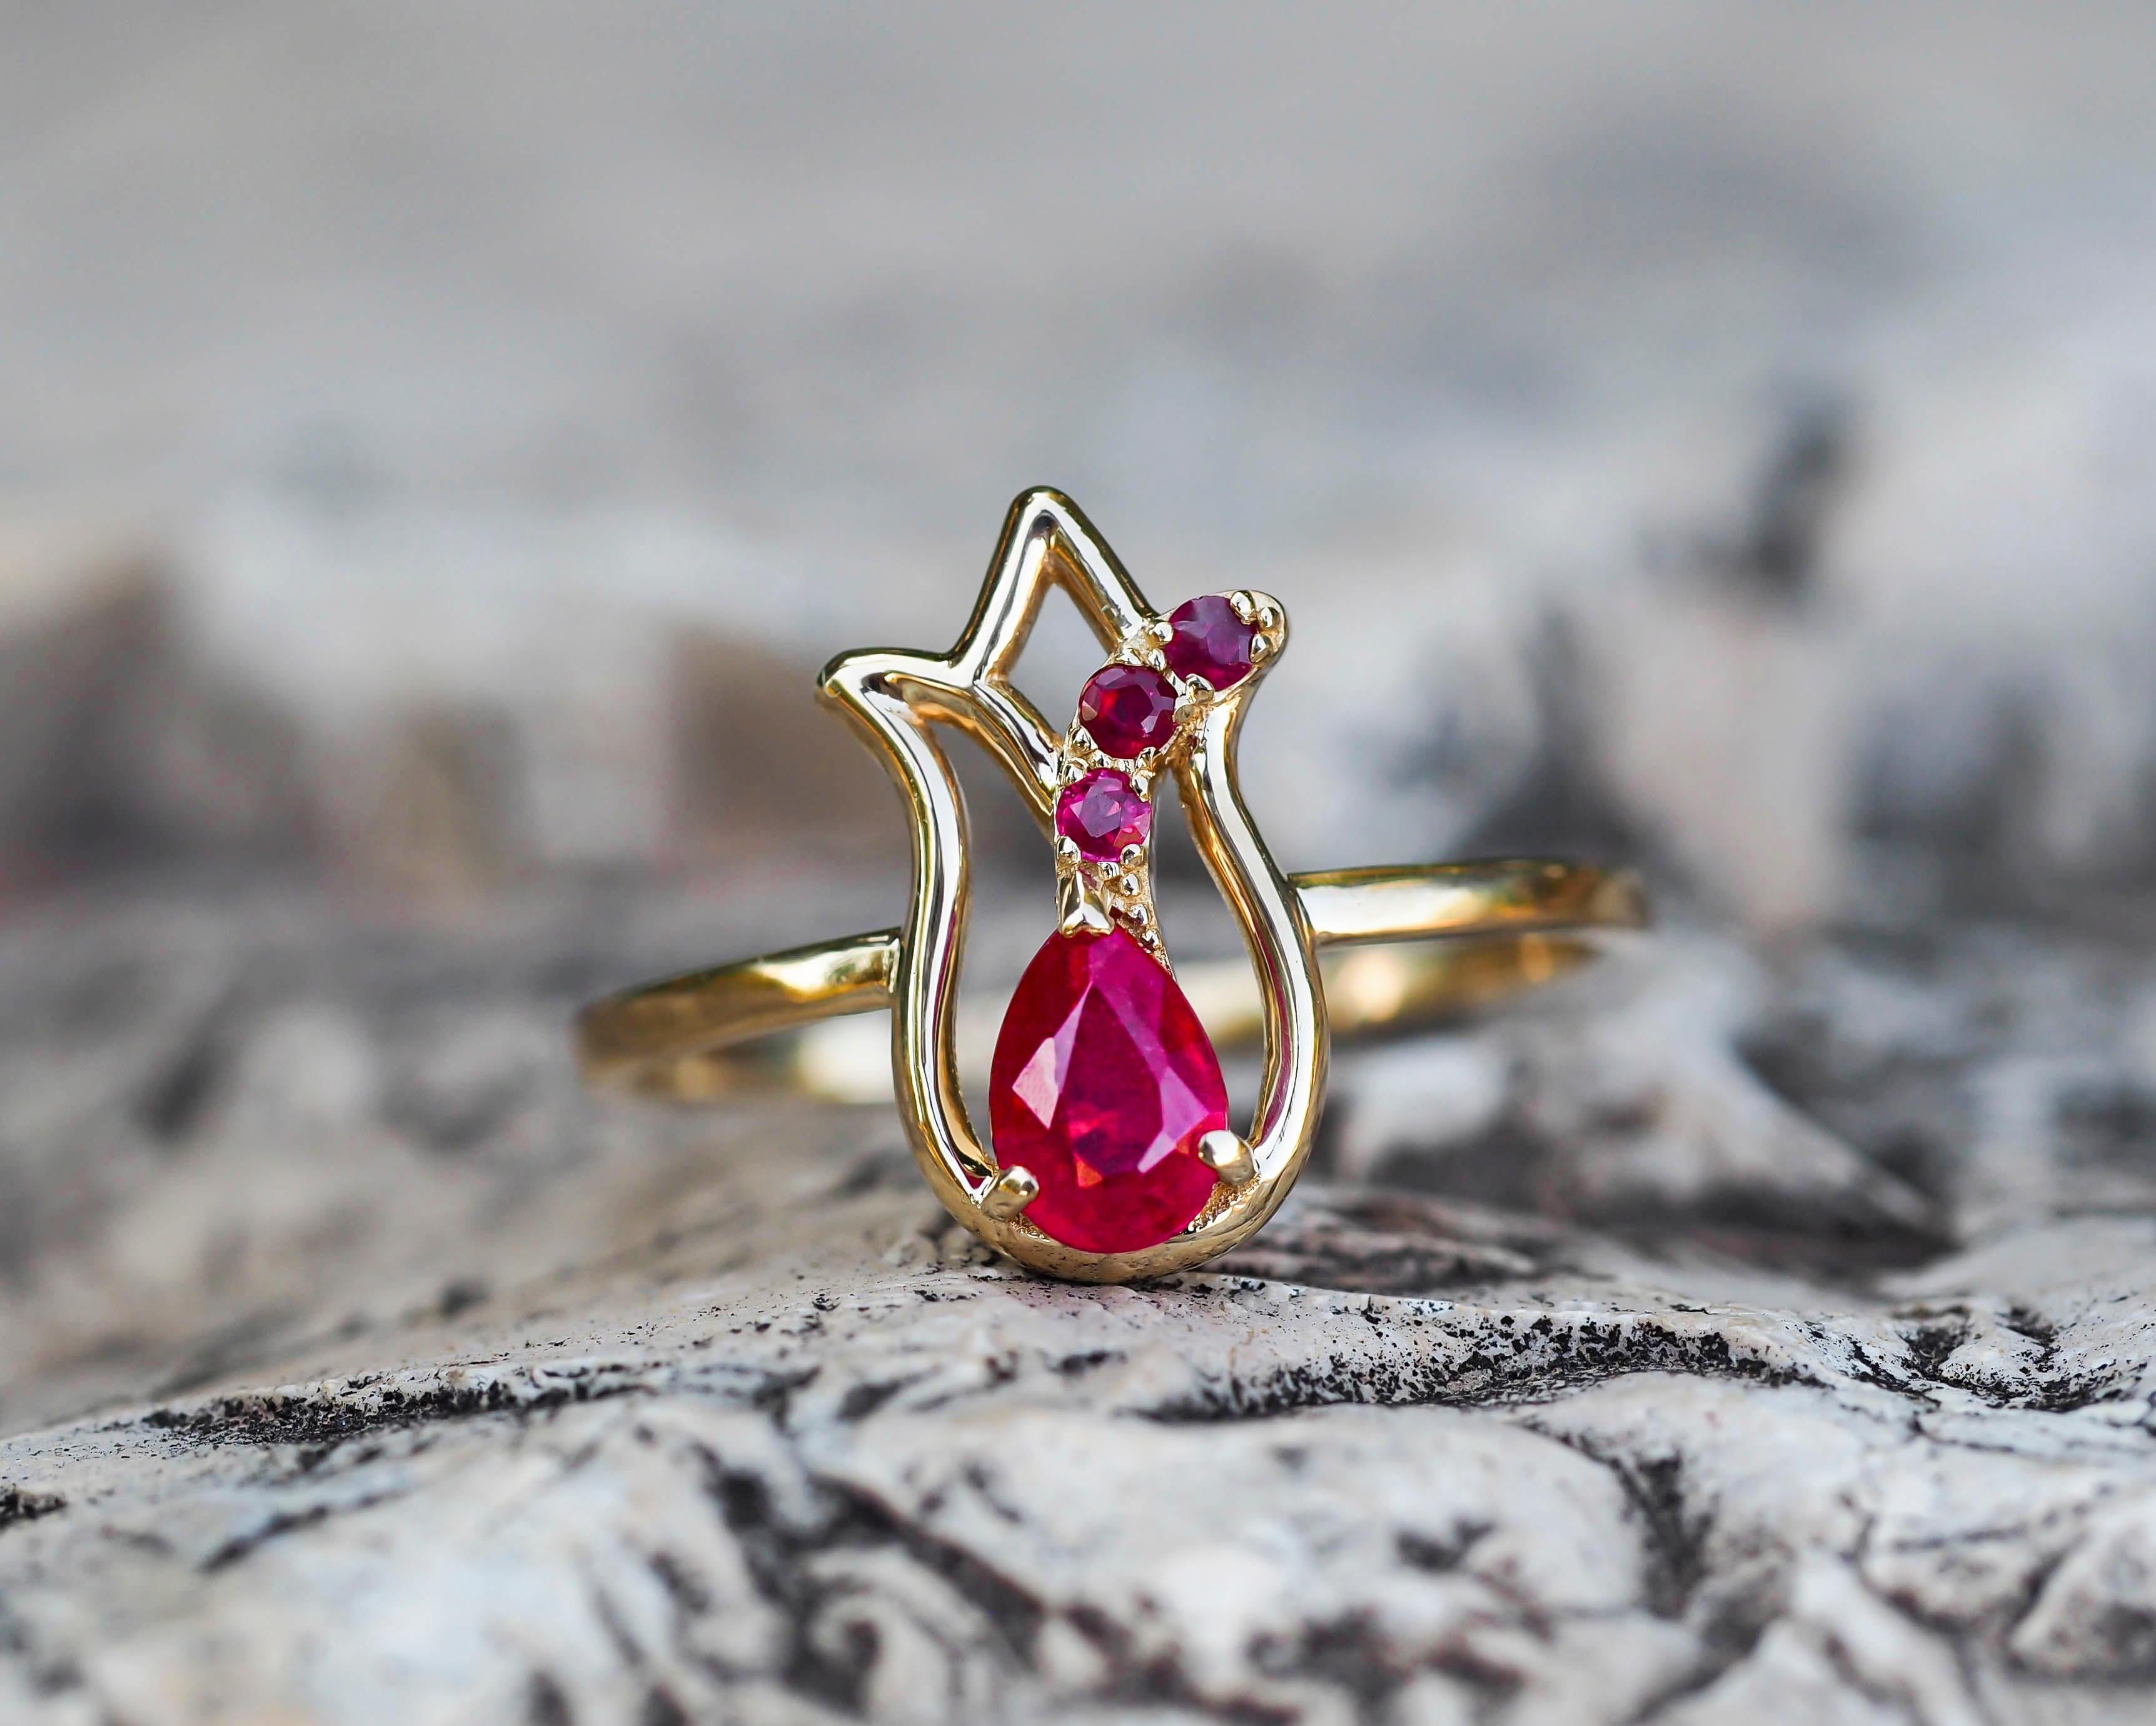 For Sale:  14 Karat Gold Ring with Ruby and Side Rubies. Gold Tulip Flower Ring ! 9